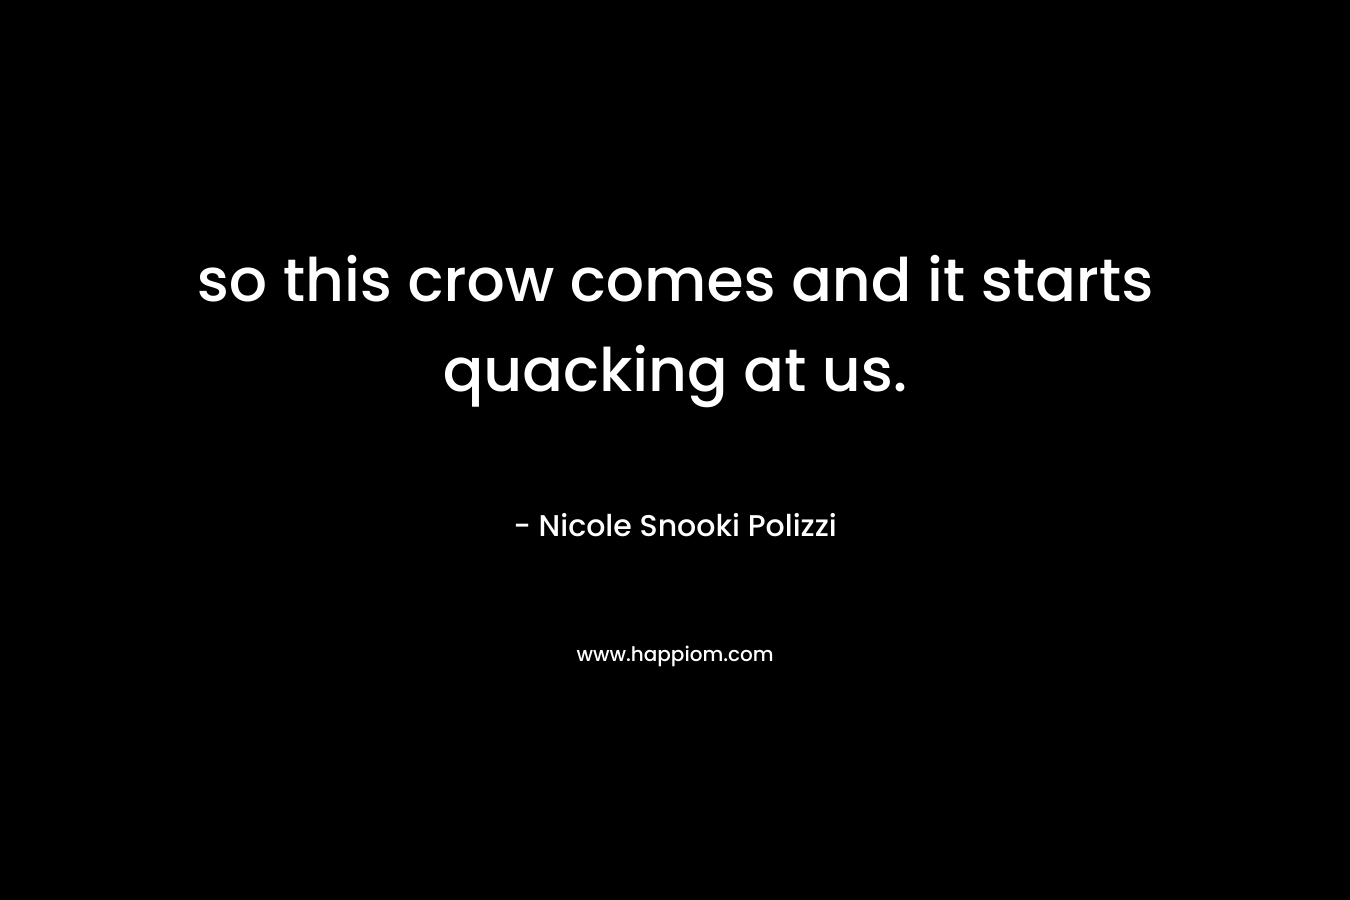 so this crow comes and it starts quacking at us. – Nicole Snooki Polizzi